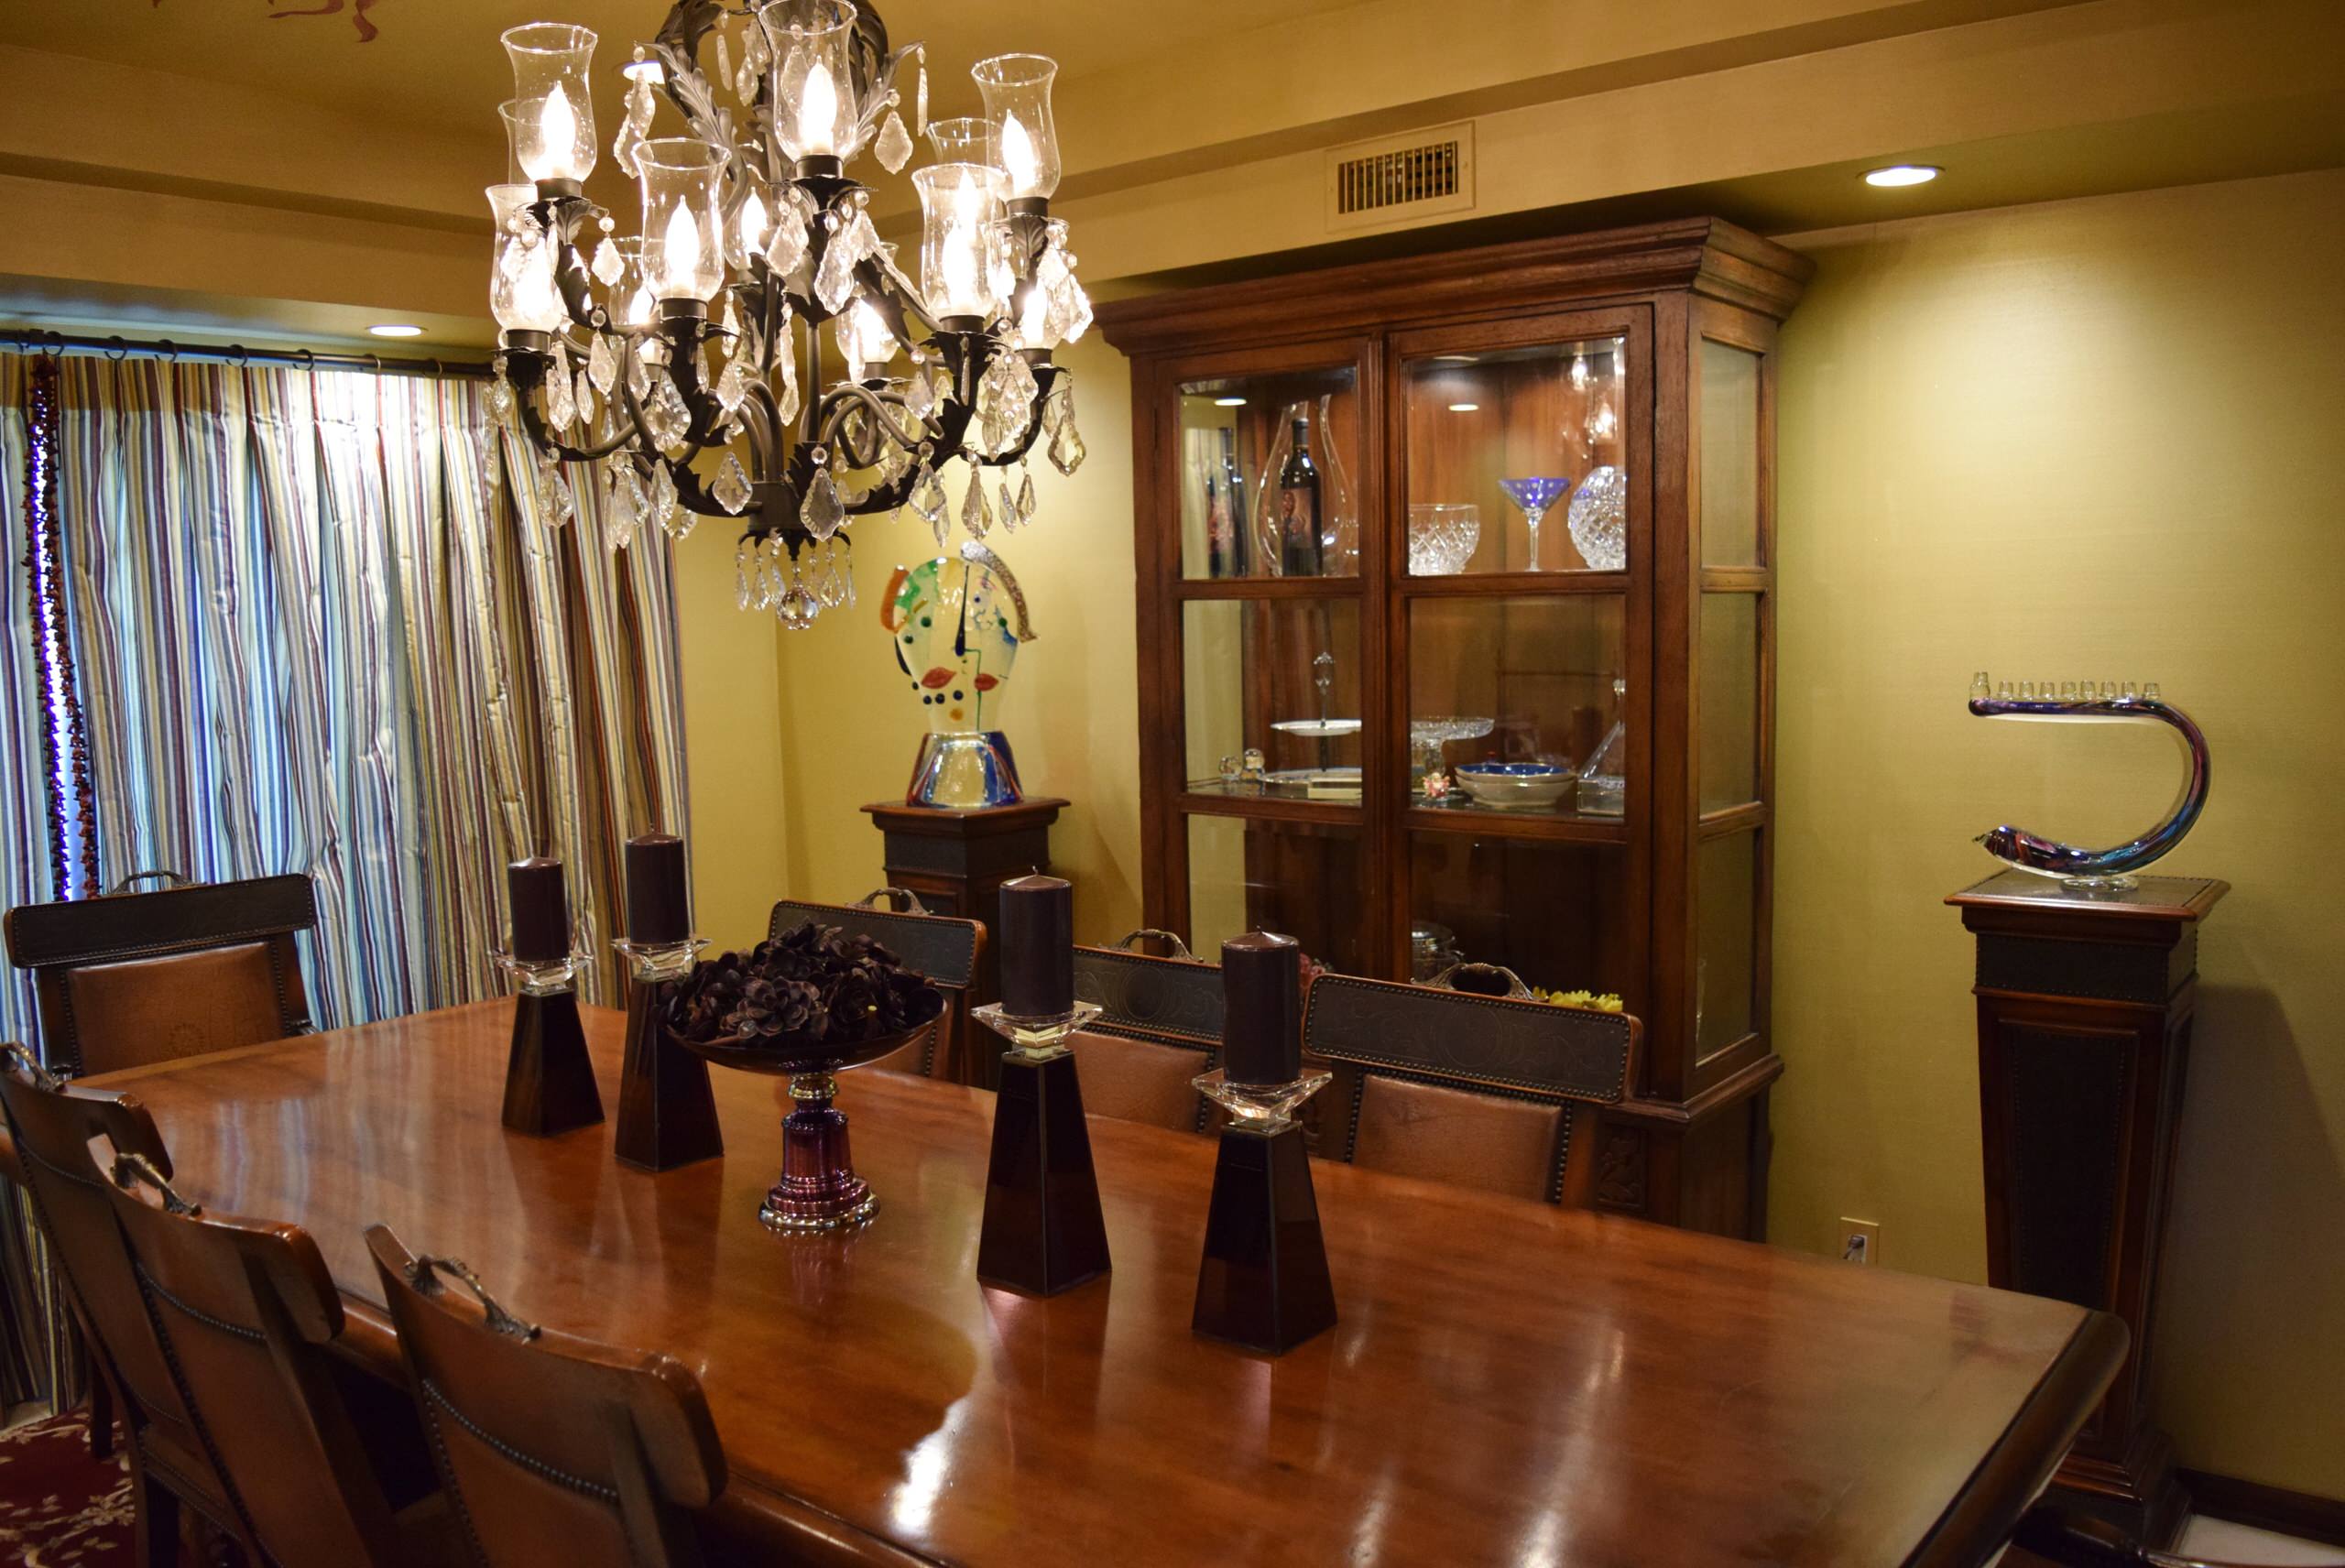 The Rubin Dining Room and Family Room Remodel in Encino, Ca.